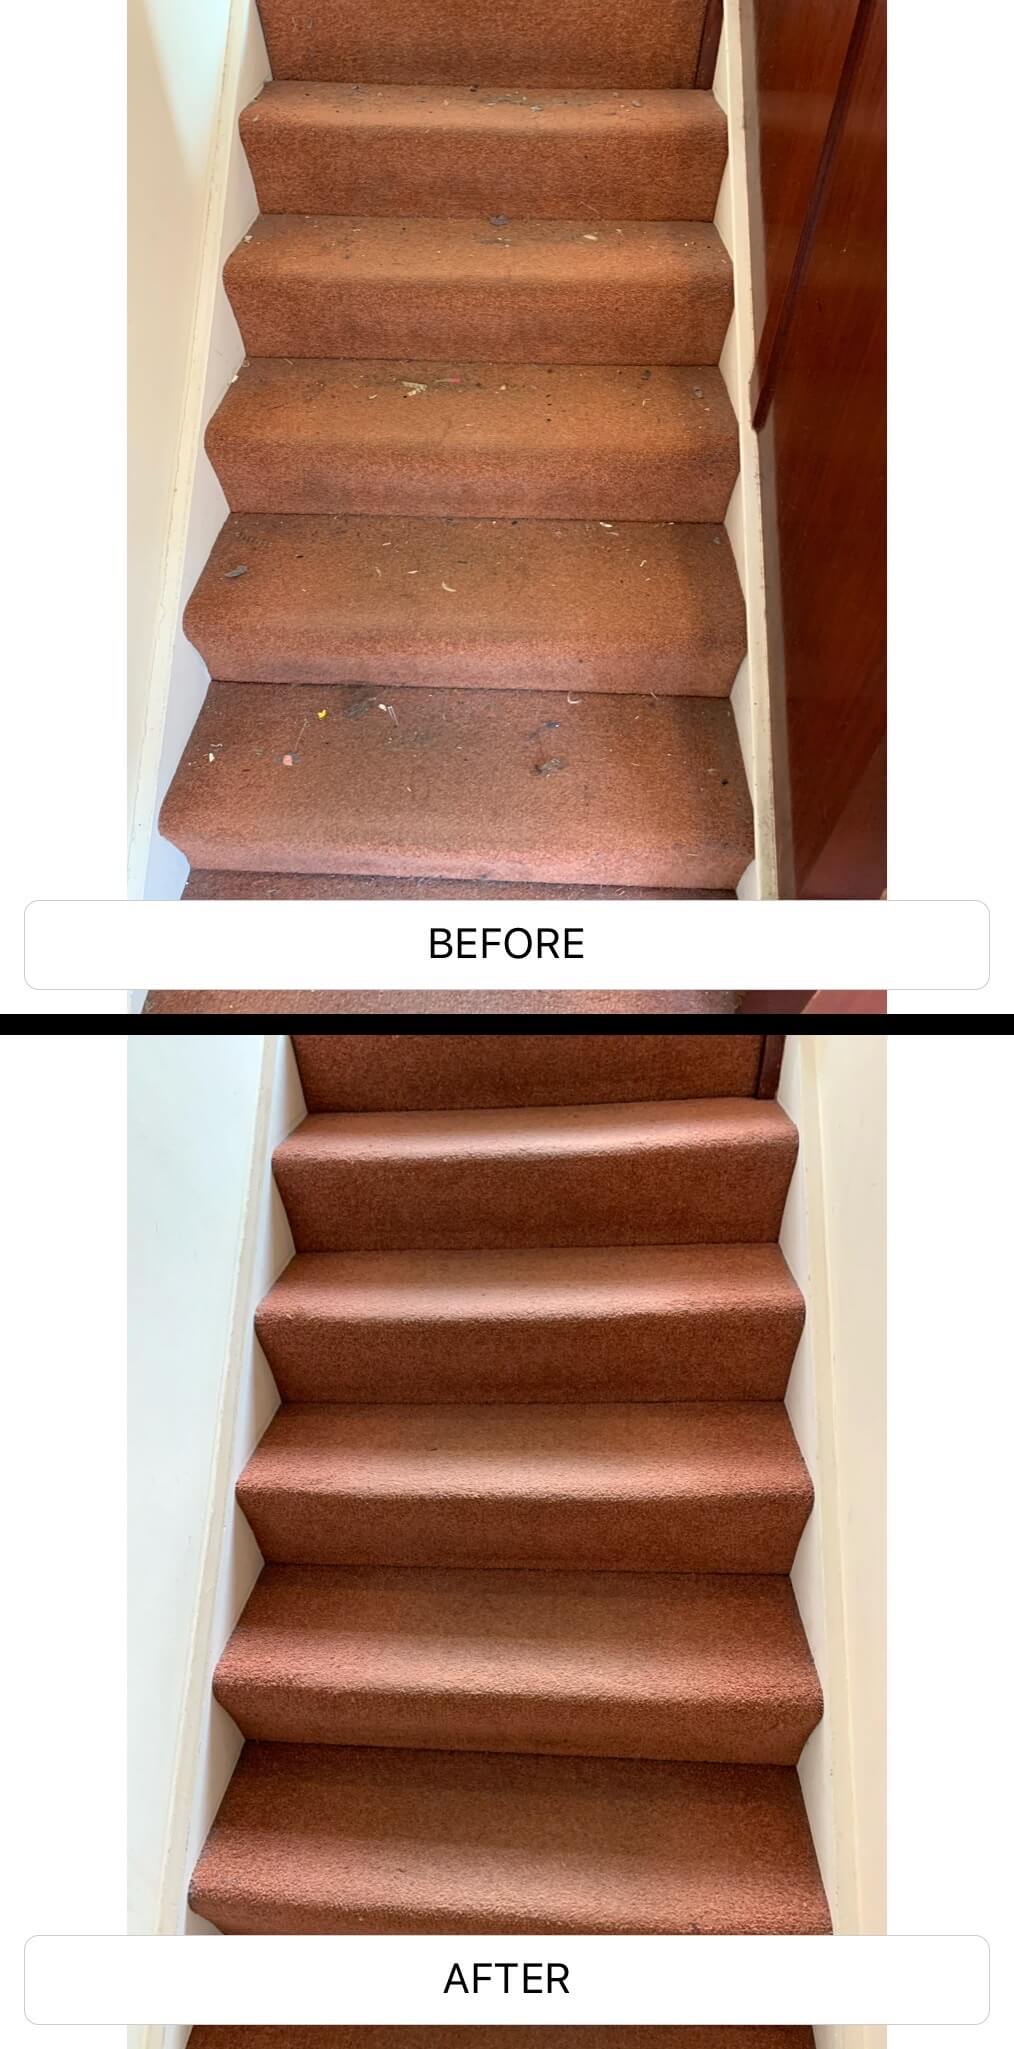 stairs shown before and after professional carpet cleaning in london